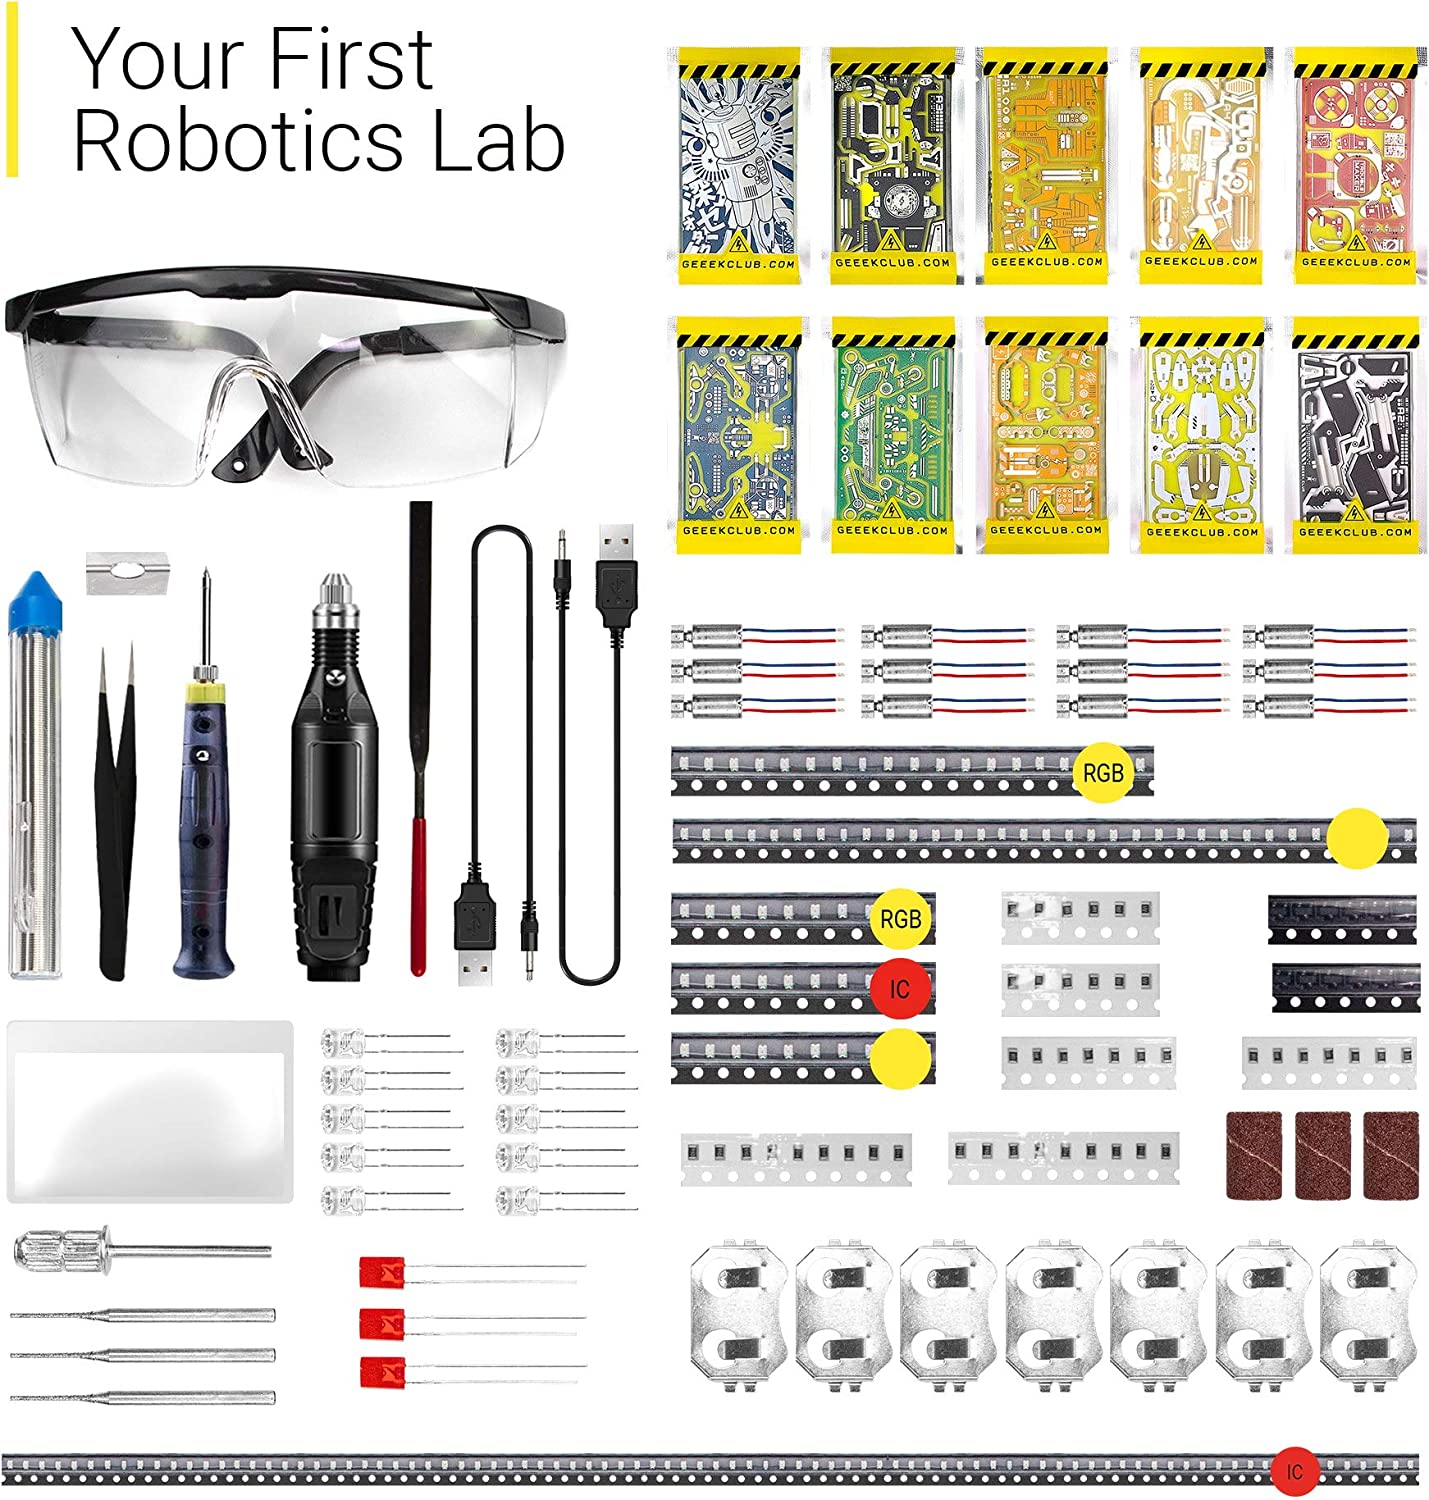  Geeek Club Robot Building Kit for Kids and Adults - Smart Nano  Bots STEM Robotics Kits with Tools - Educational DIY Build Your Own Robot  Set - Circuit Board Engineering Robotic